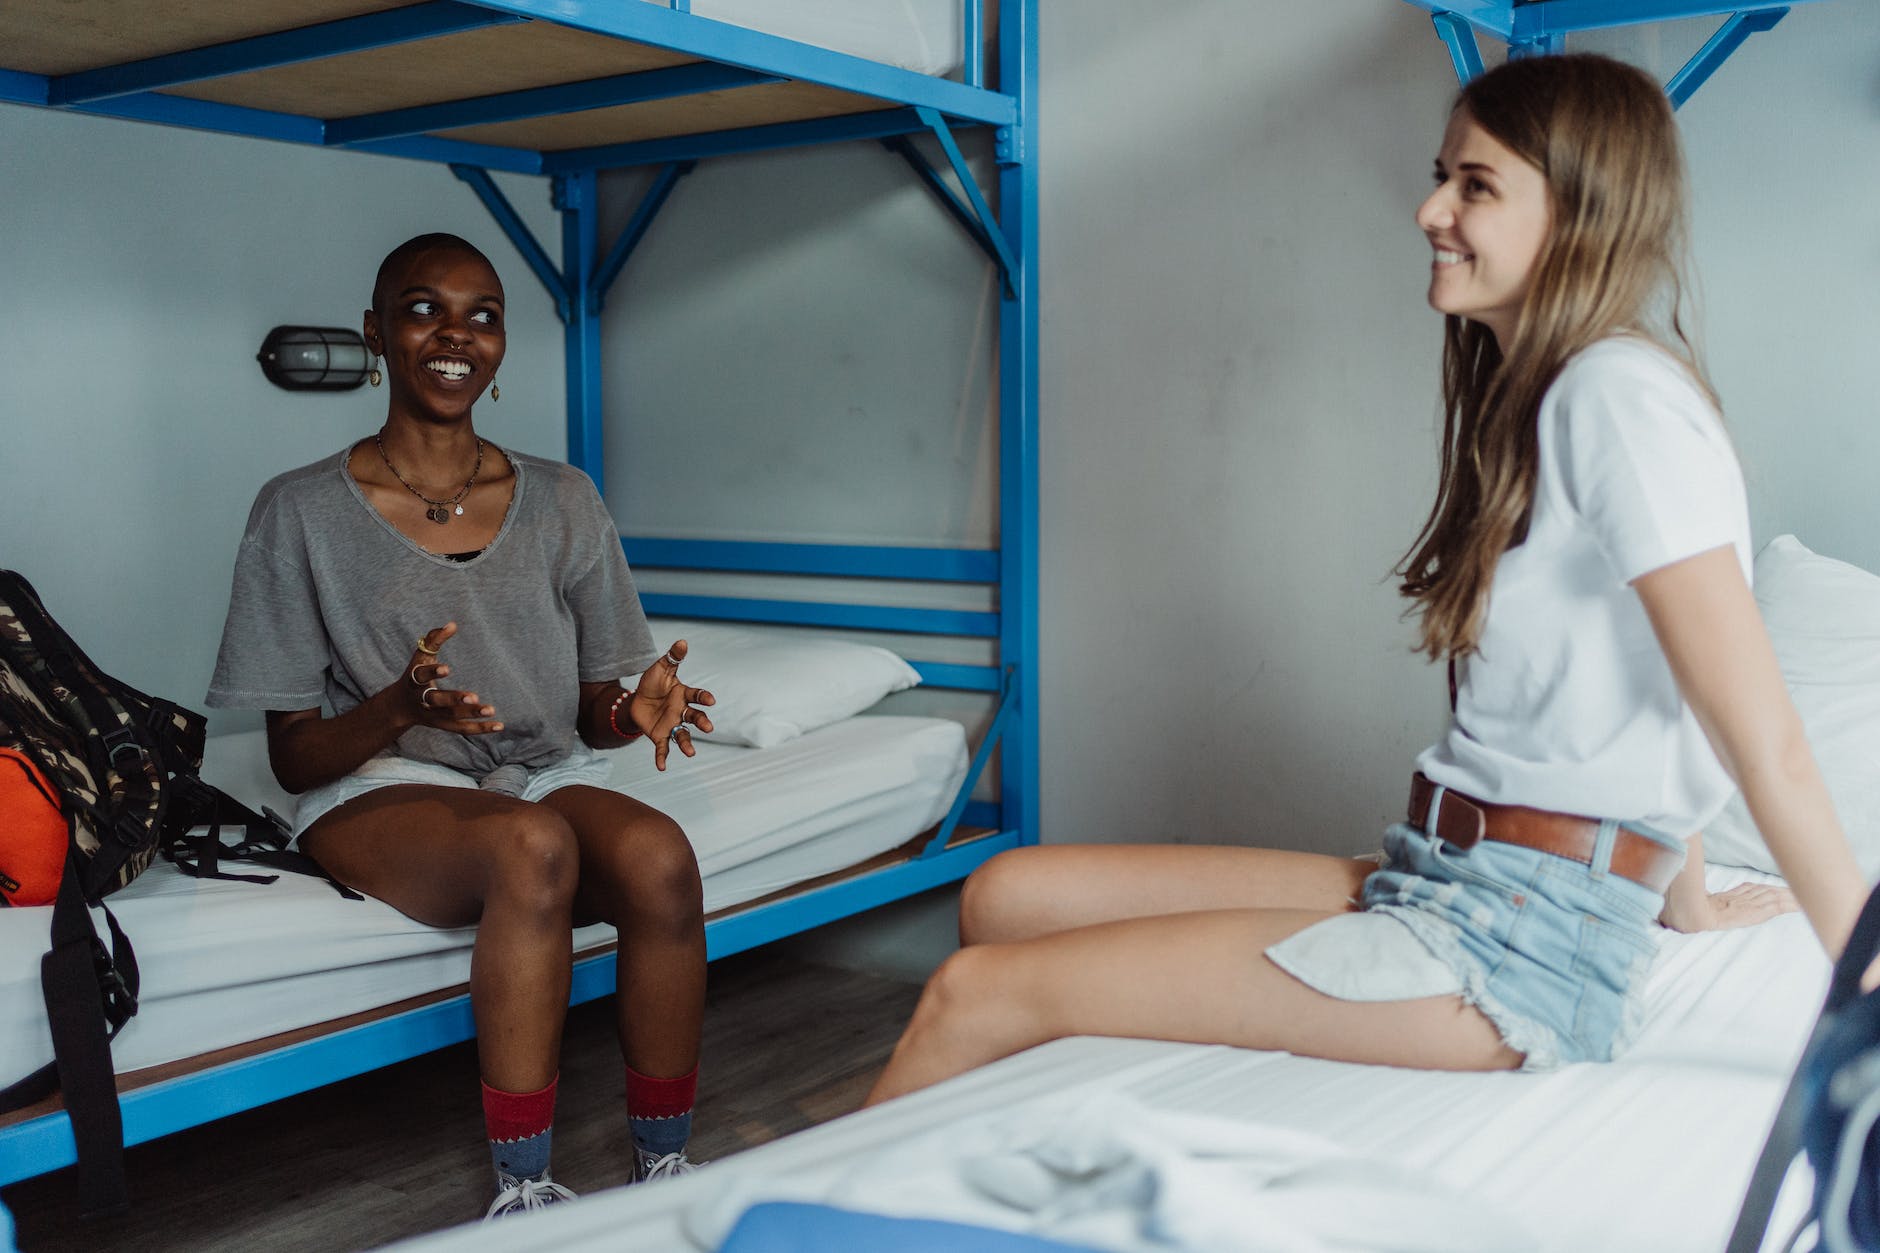 women sitting on bunk bed and smiling